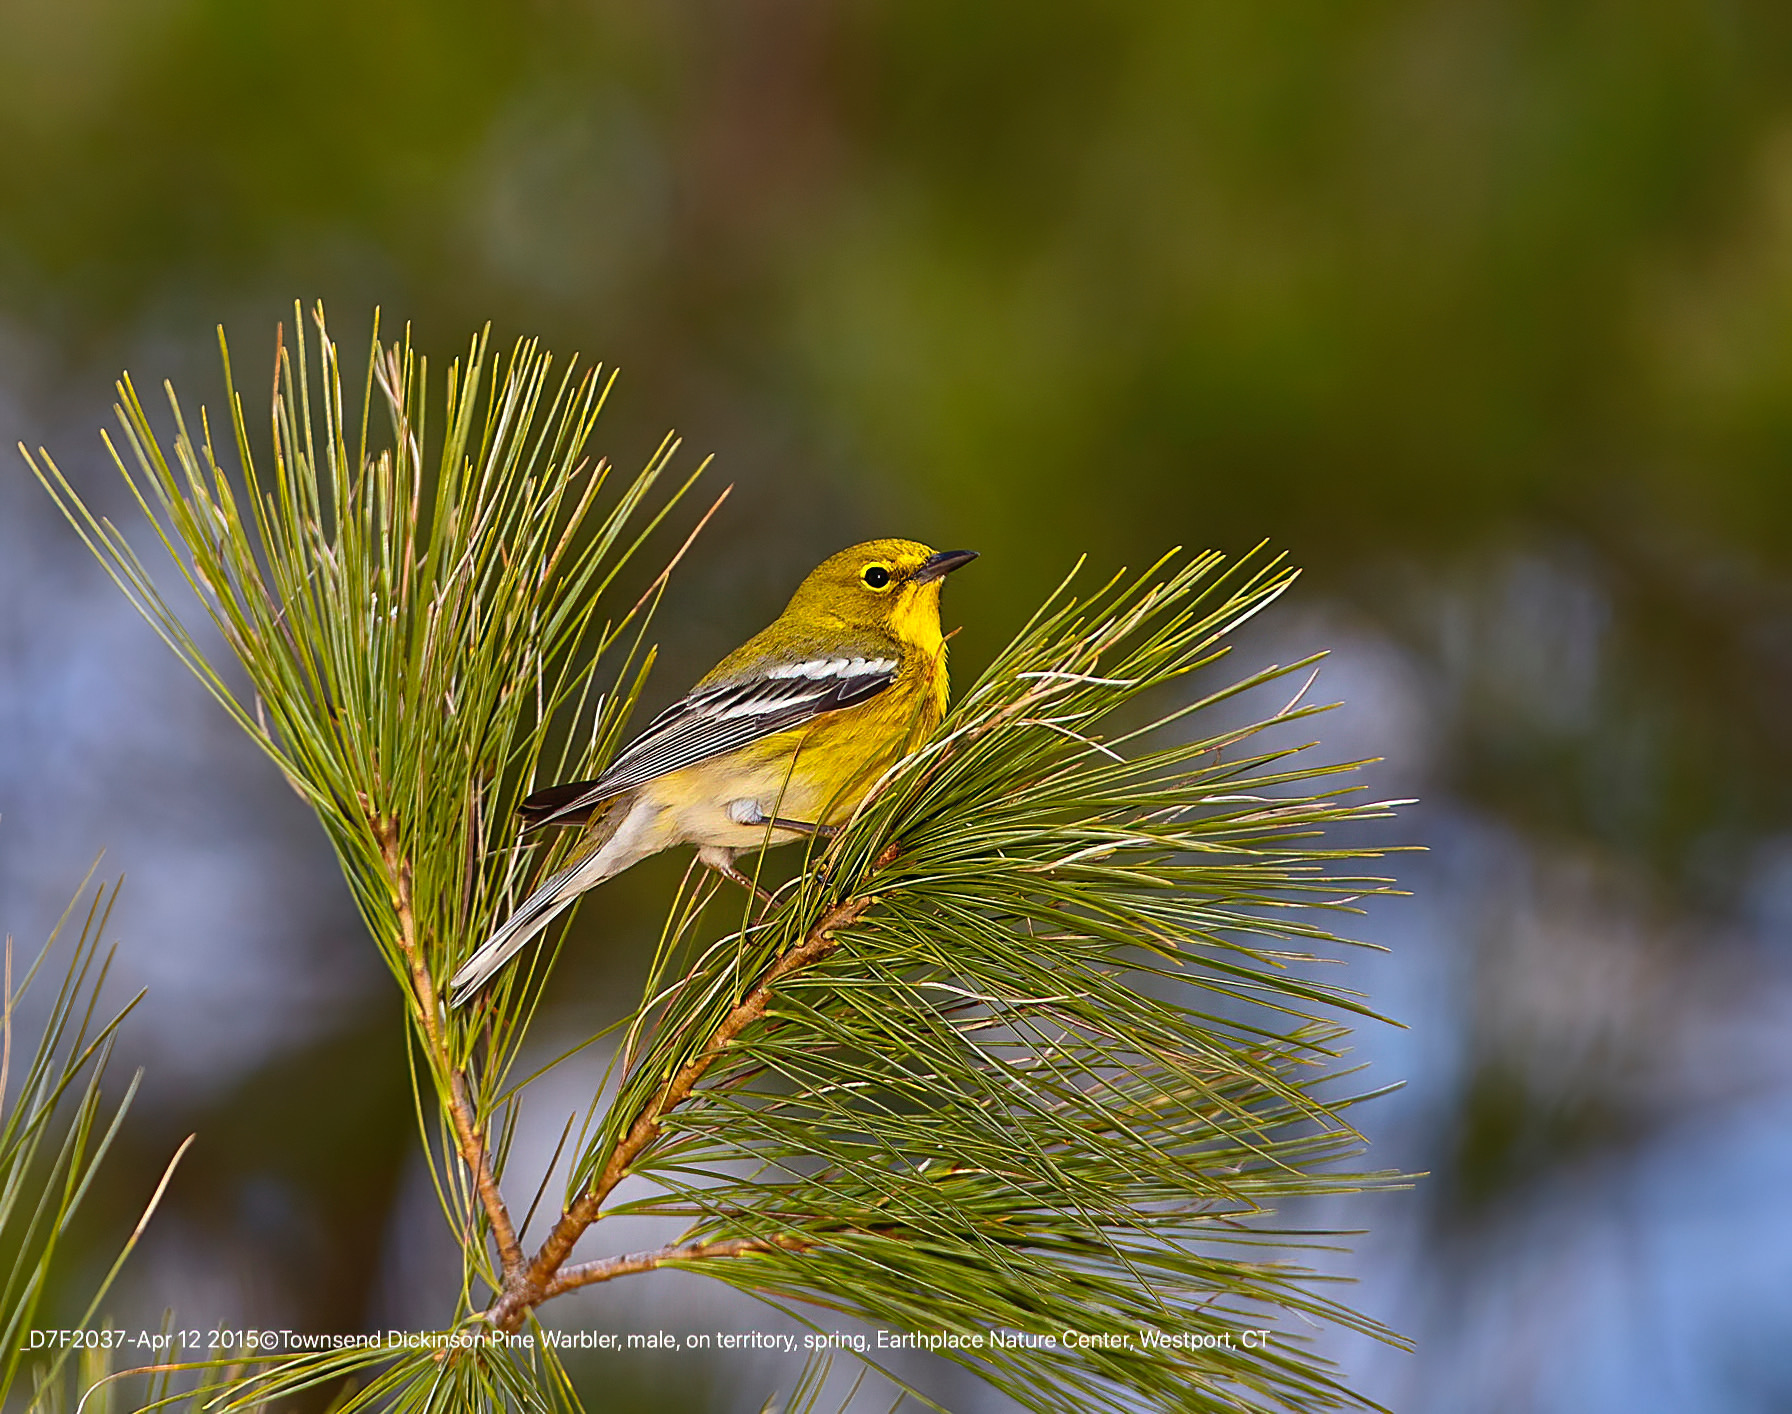 Pine Warbler, male, on territory, spring, Earthplace Nature Center, Westport, CT Townsend P. Dickinson Lis# D7F2037 All Rights Reserved